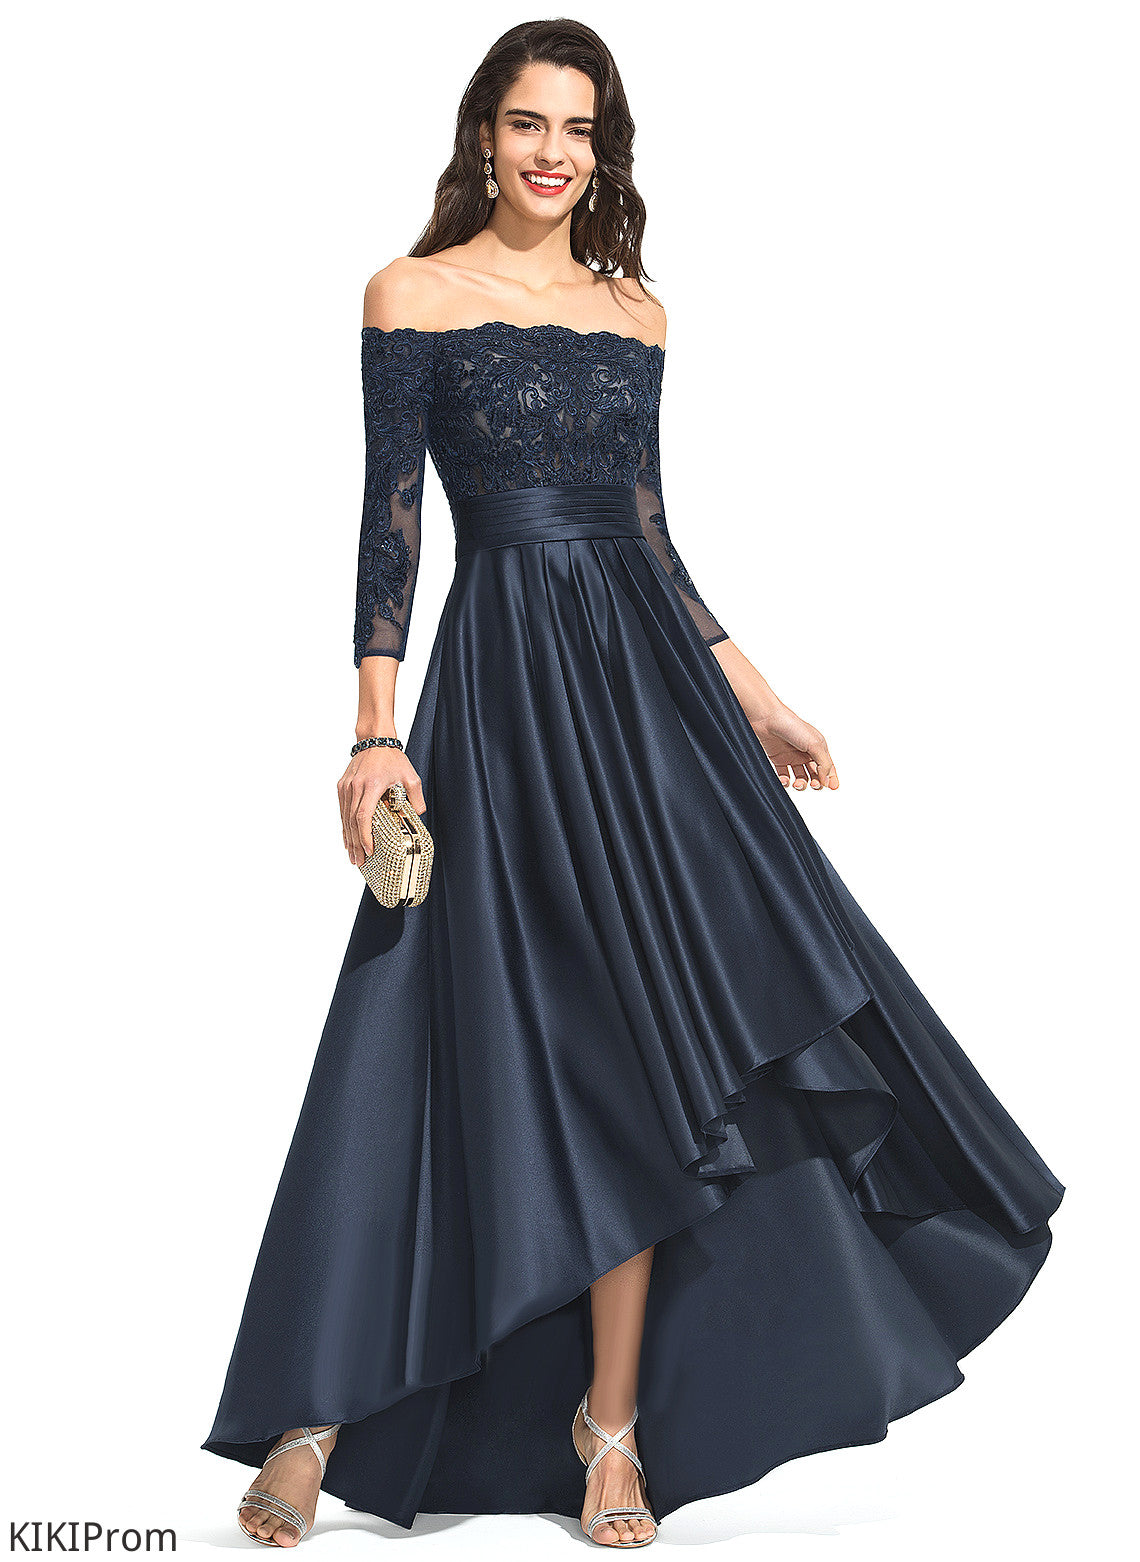 With Cascading Asymmetrical A-Line Off-the-Shoulder Ruffles Poll Satin Prom Dresses Sequins Lace